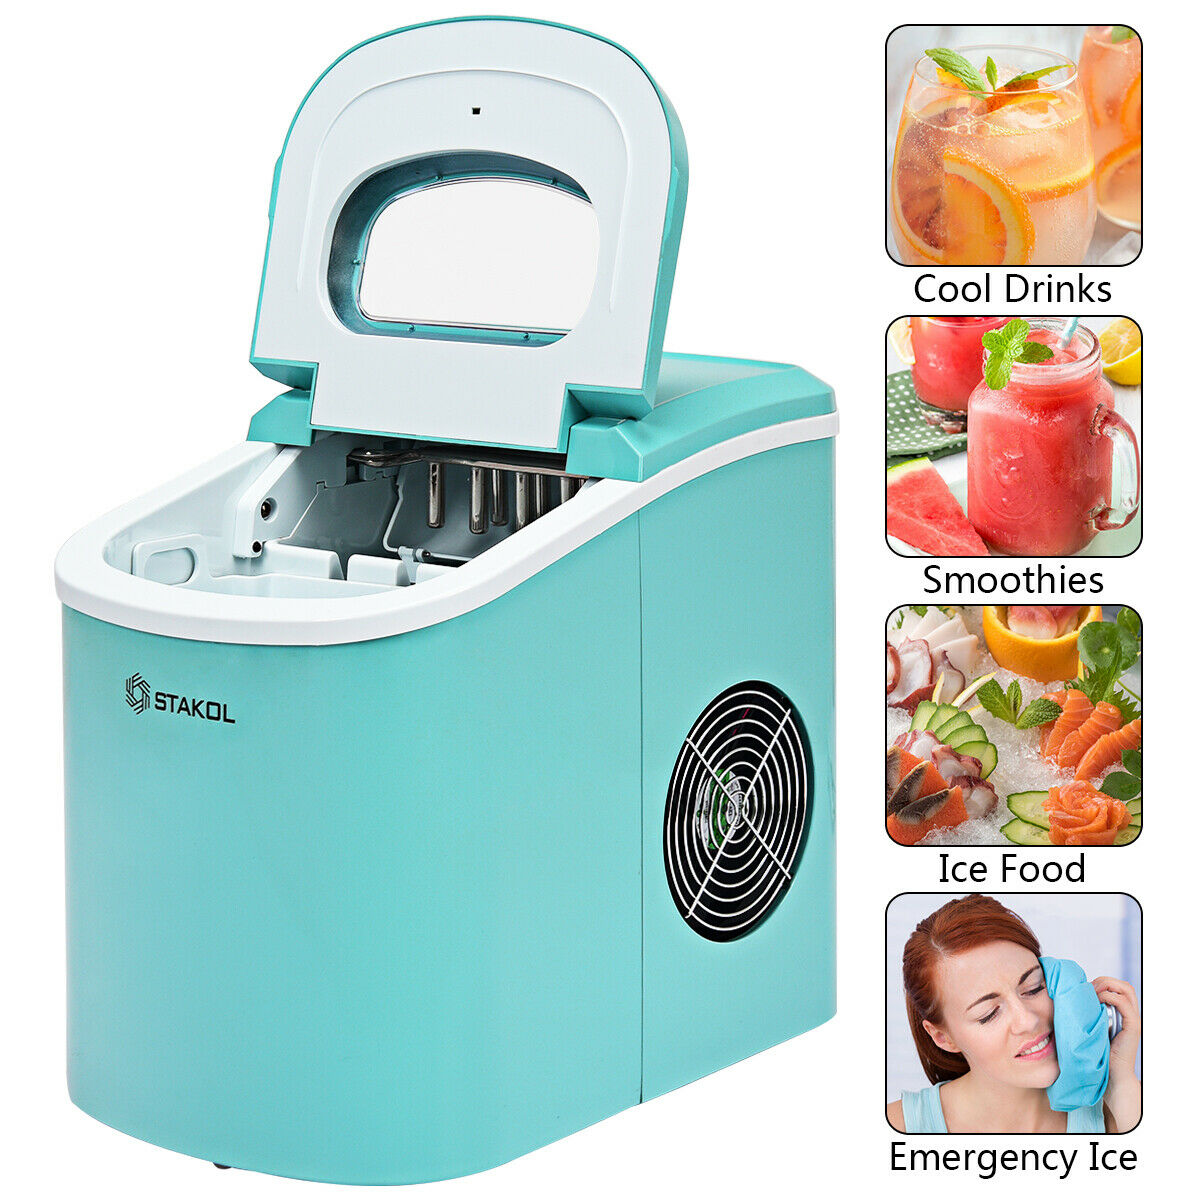 Stakol Portable Compact Electric Ice Maker Machine Mini Cube 26lb/Day Mint Green - image 5 of 10